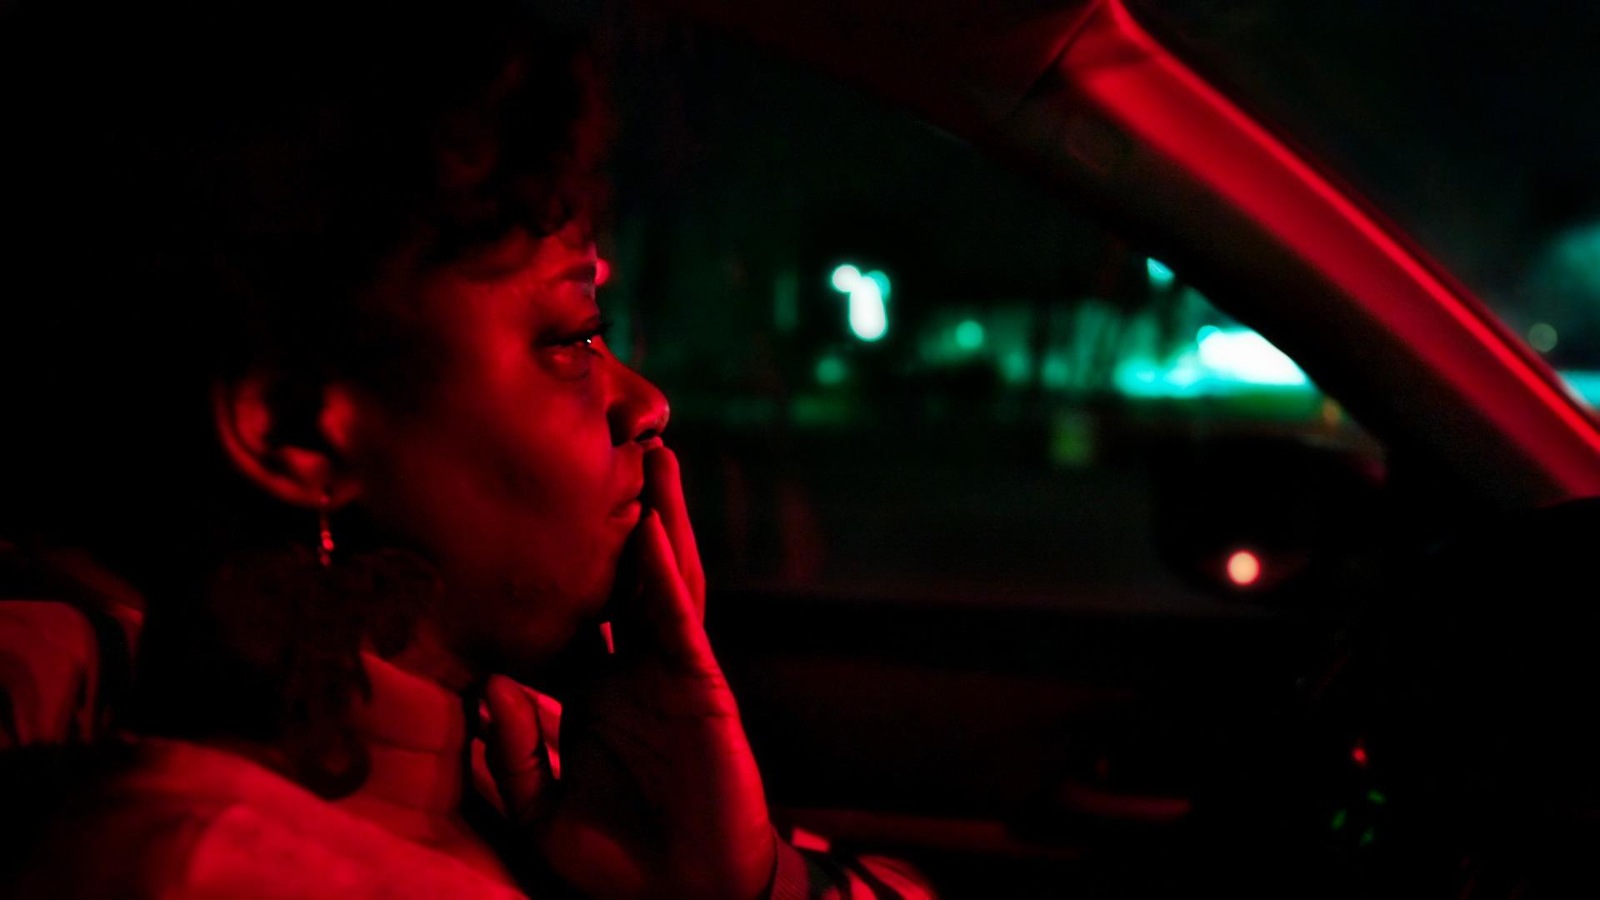 A woman in her car, in profile, under red lighting.